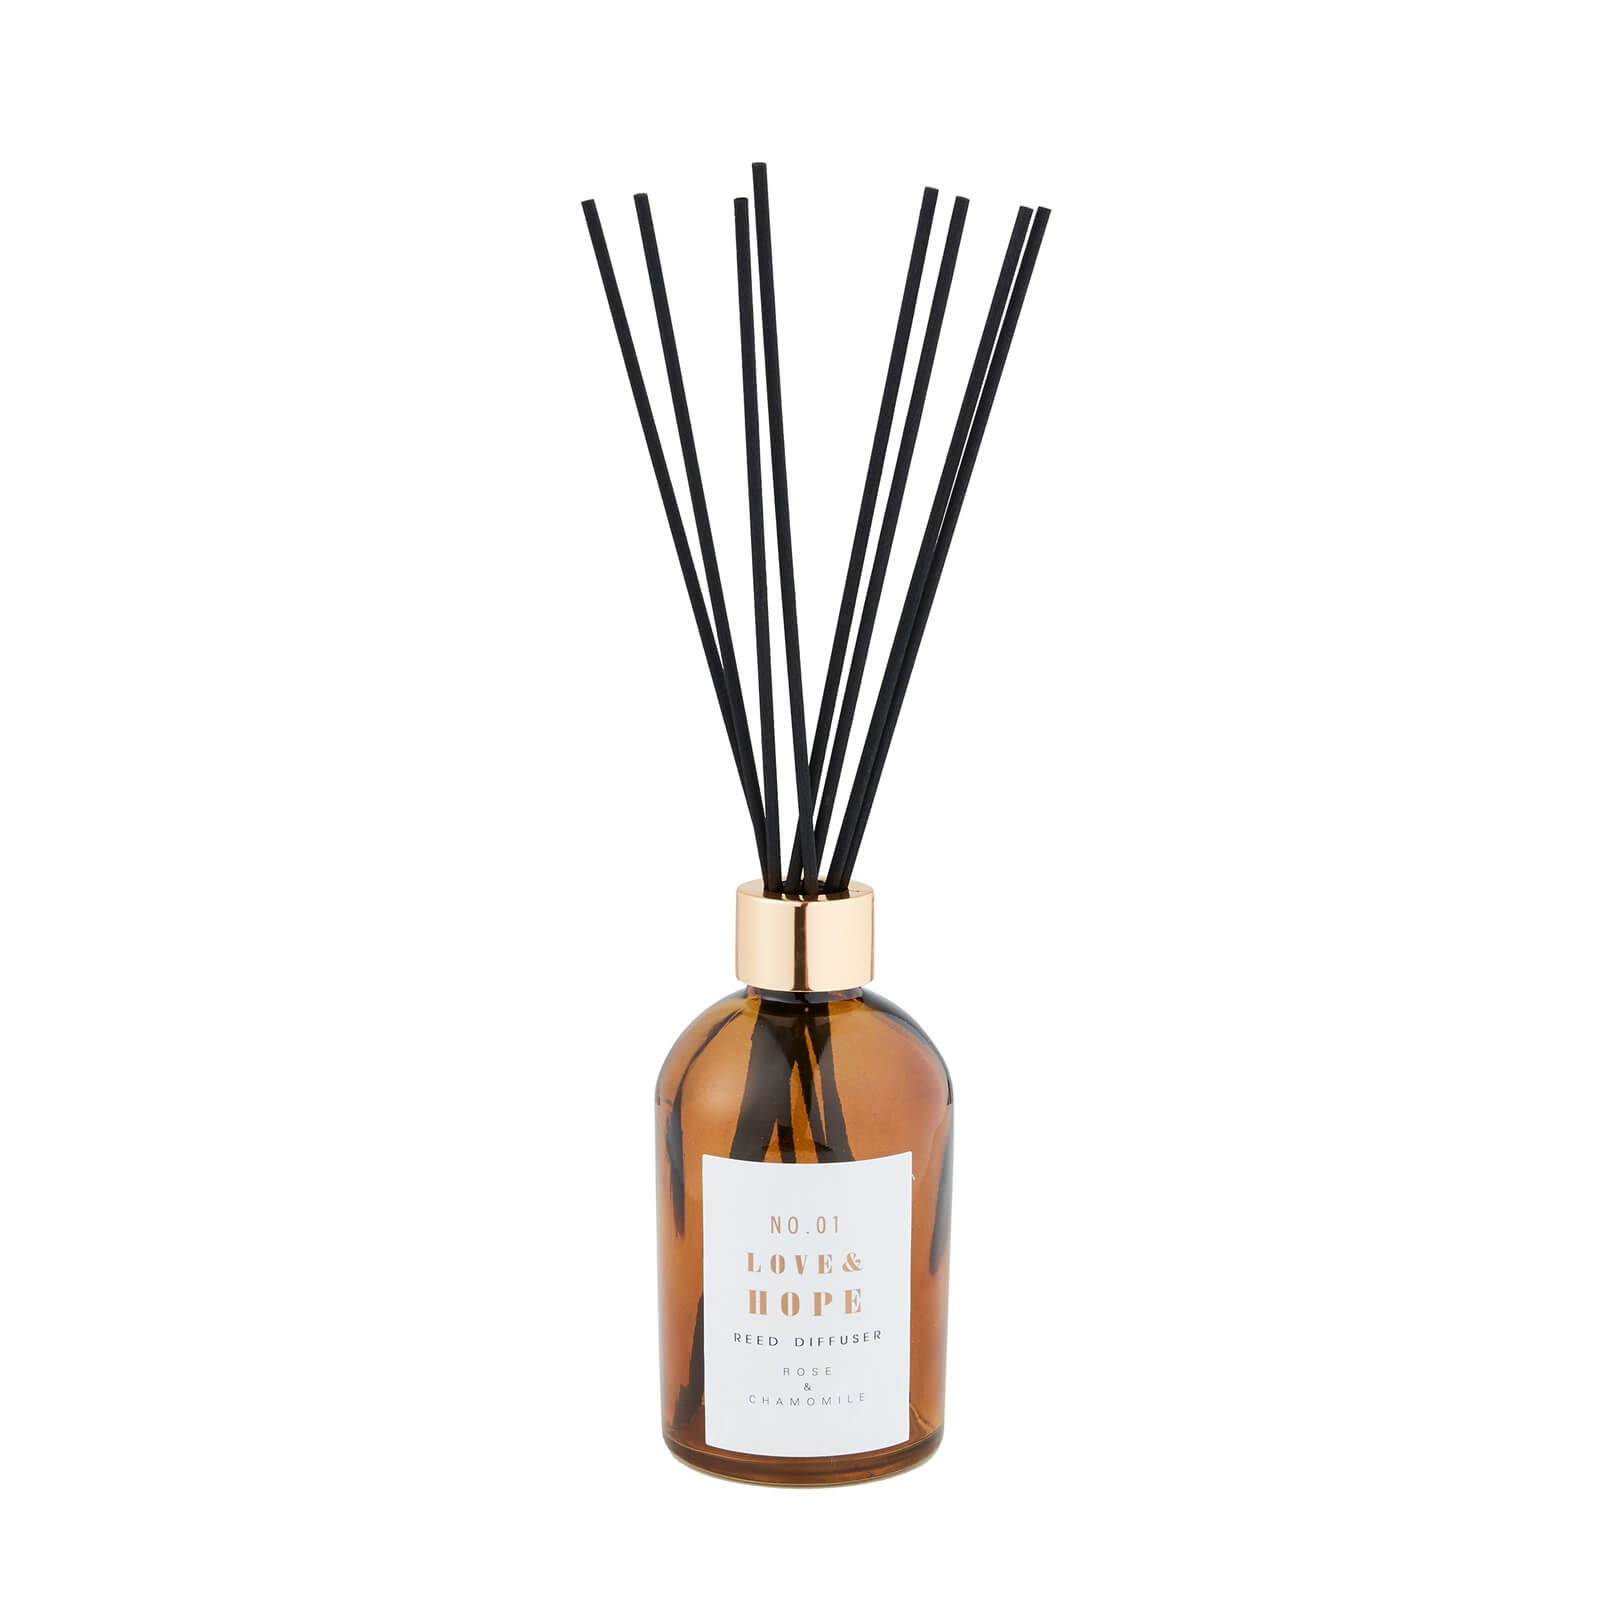 Rose & Chamomile Reed Diffuser